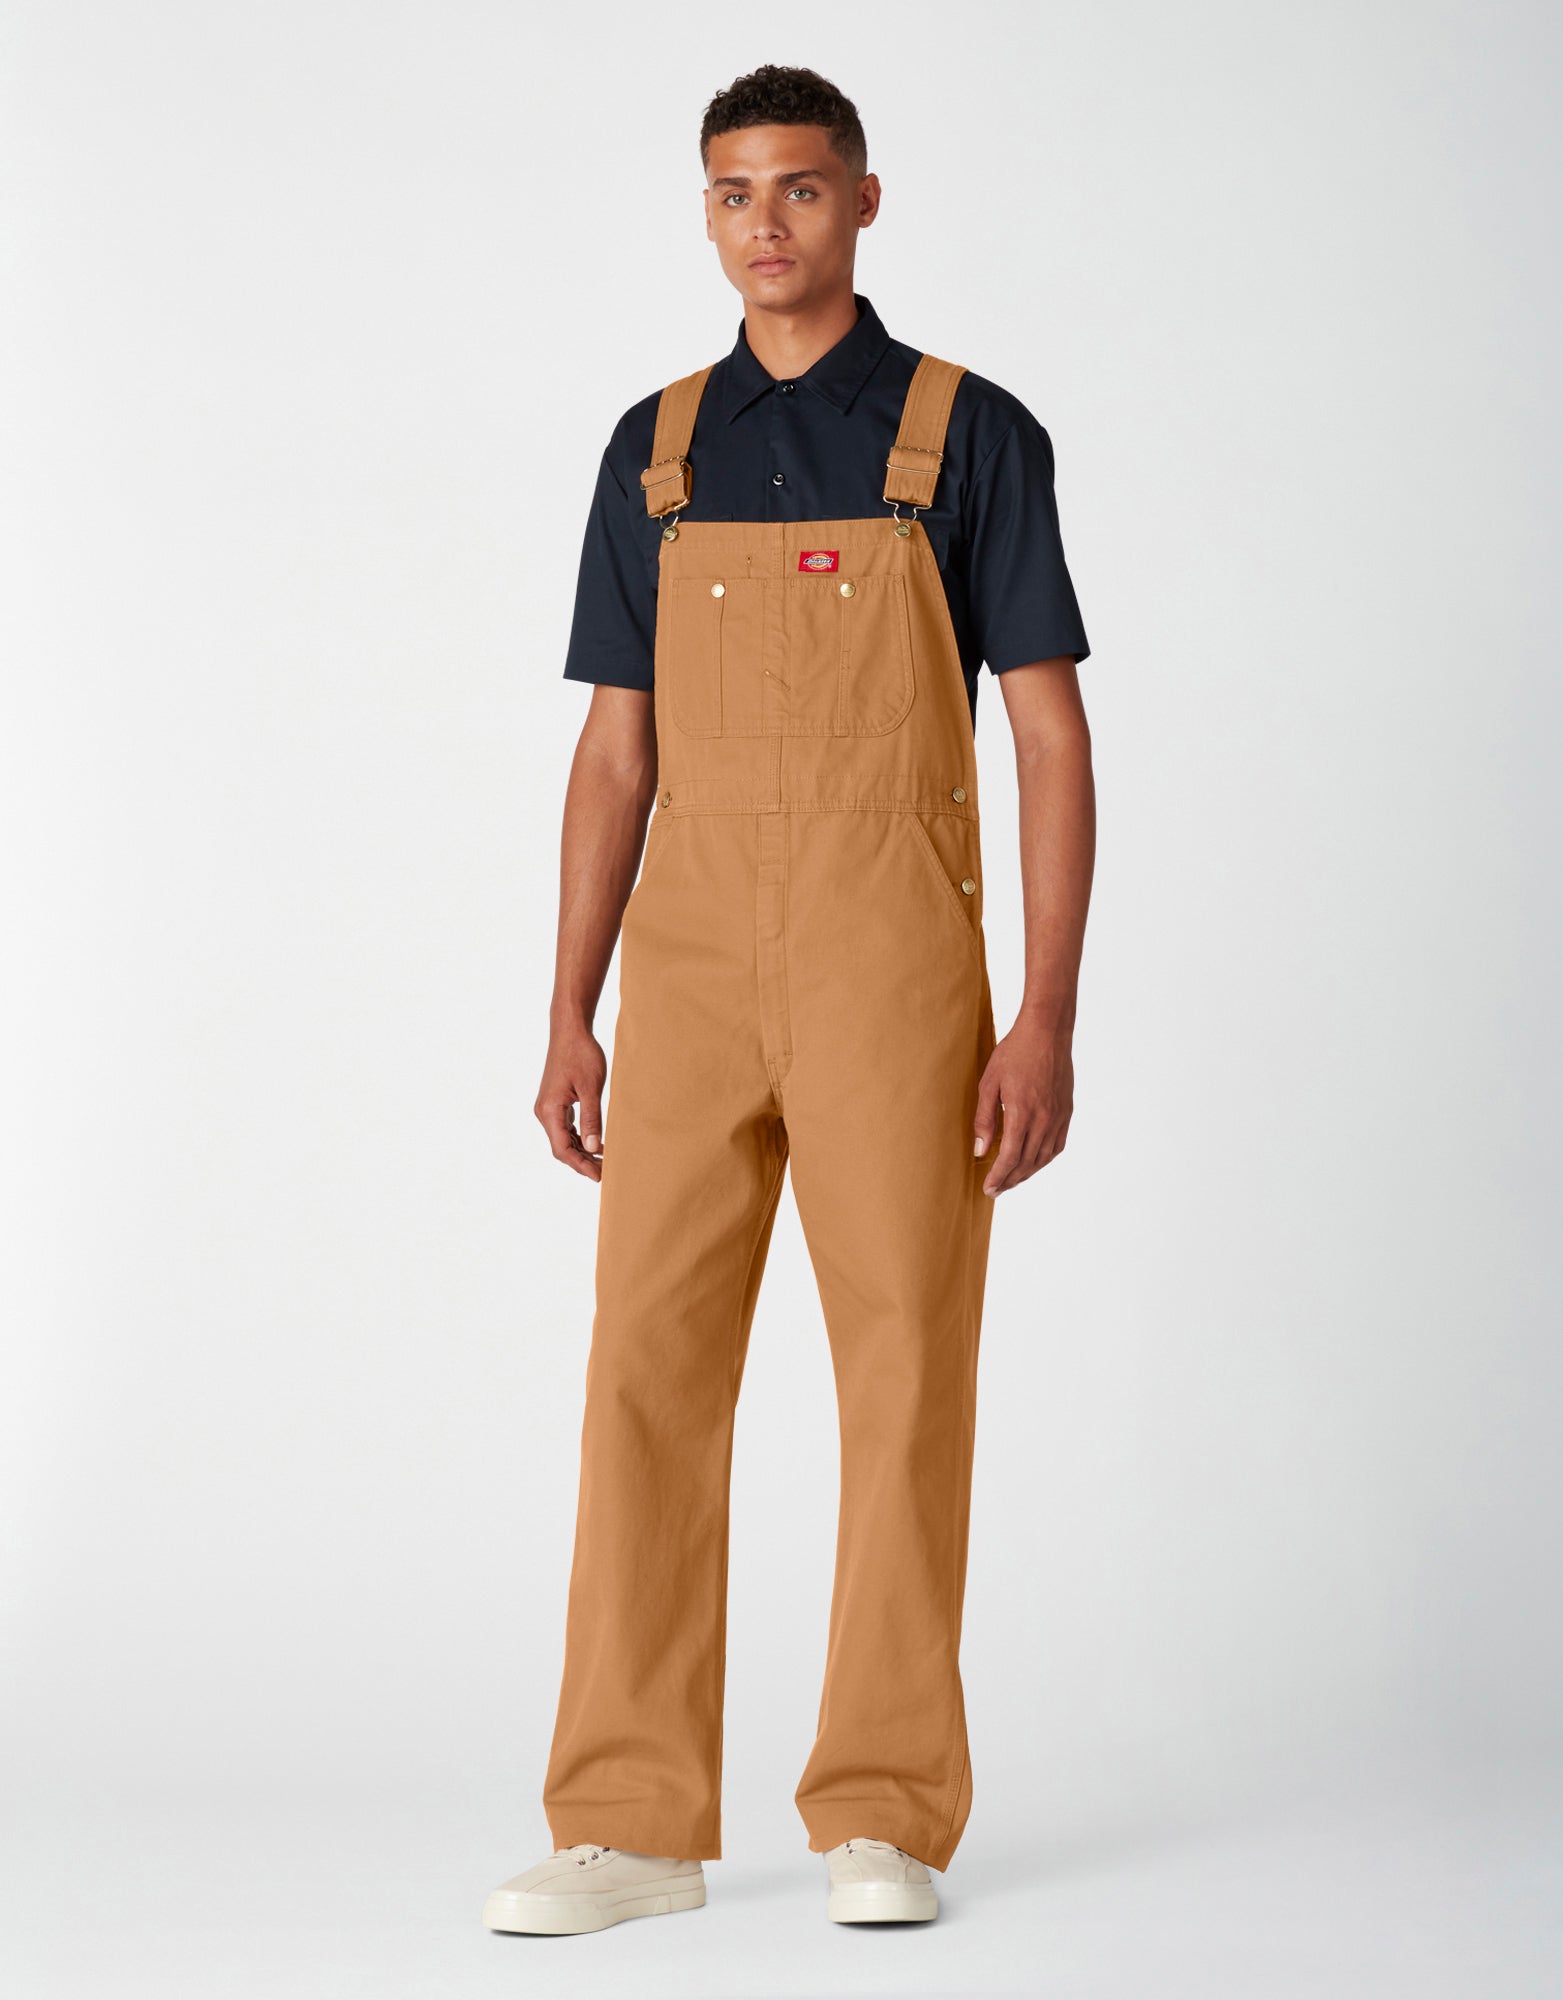 Dickies Men's Classic Bib Overall - Work World - Workwear, Work Boots, Safety Gear